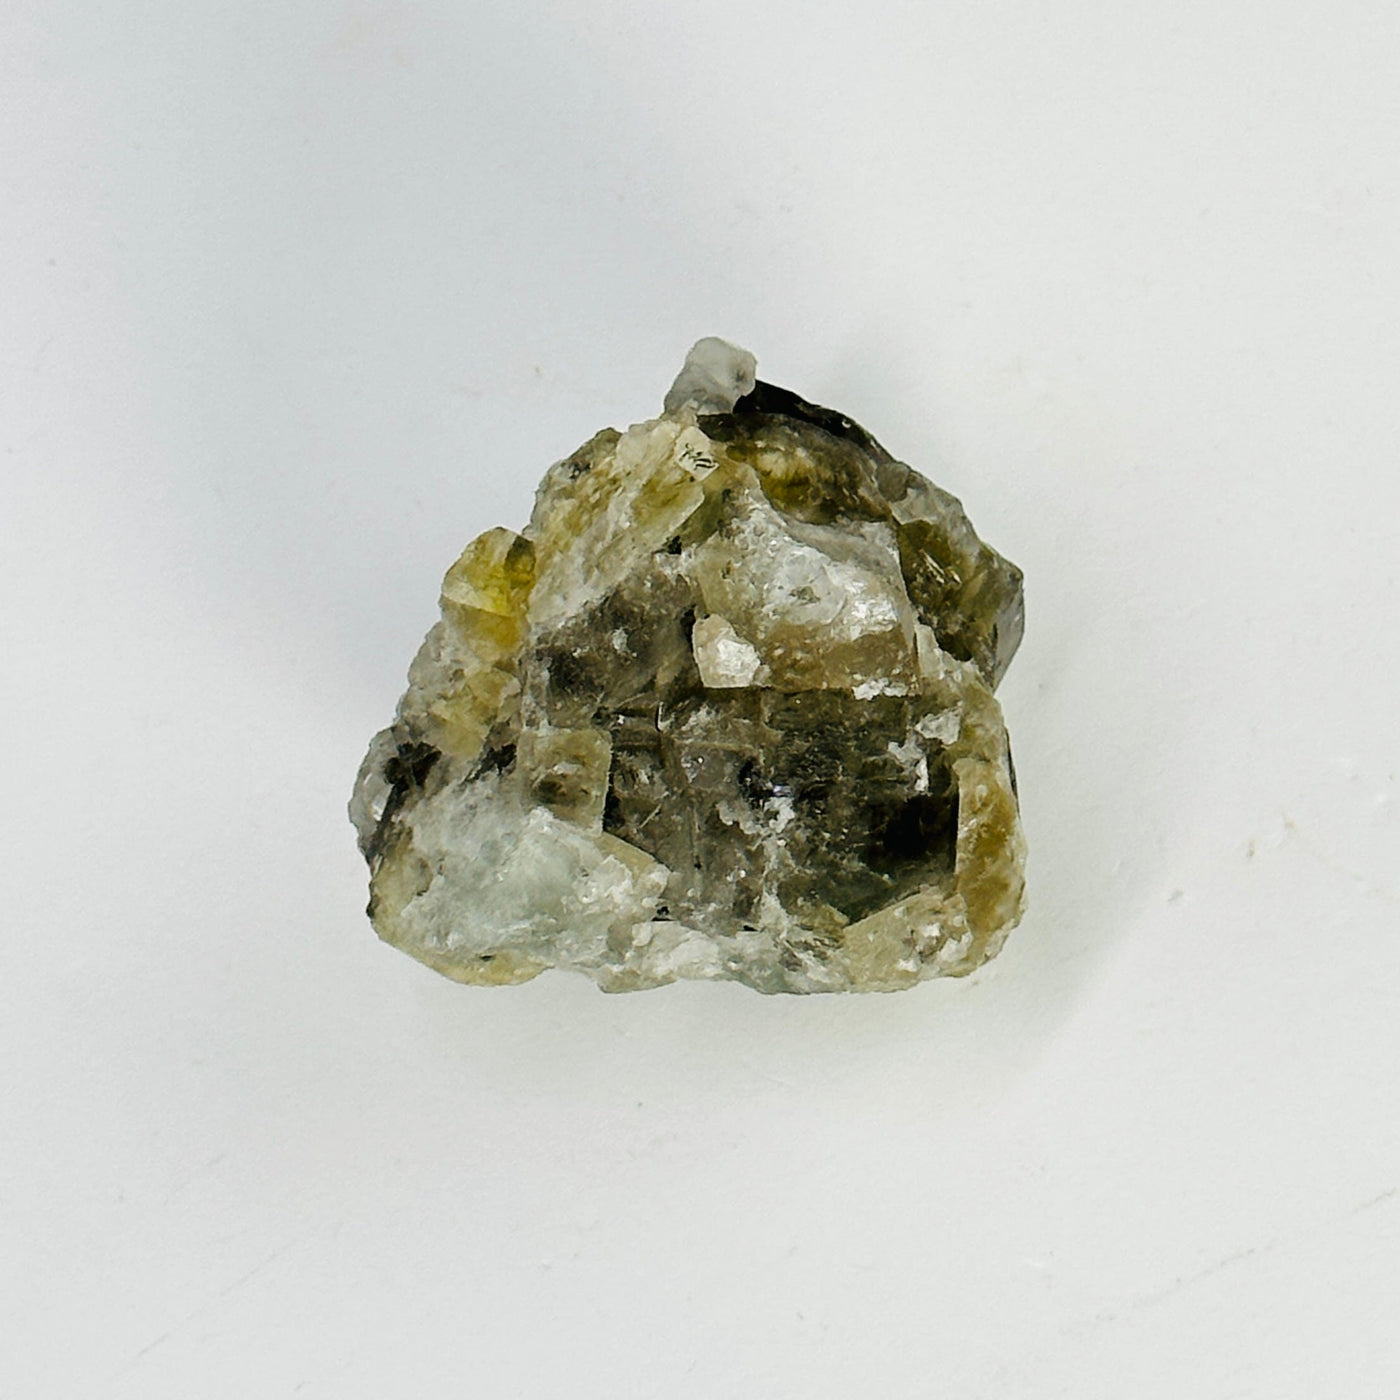 epidote with crystal quartz growth cluster on white background